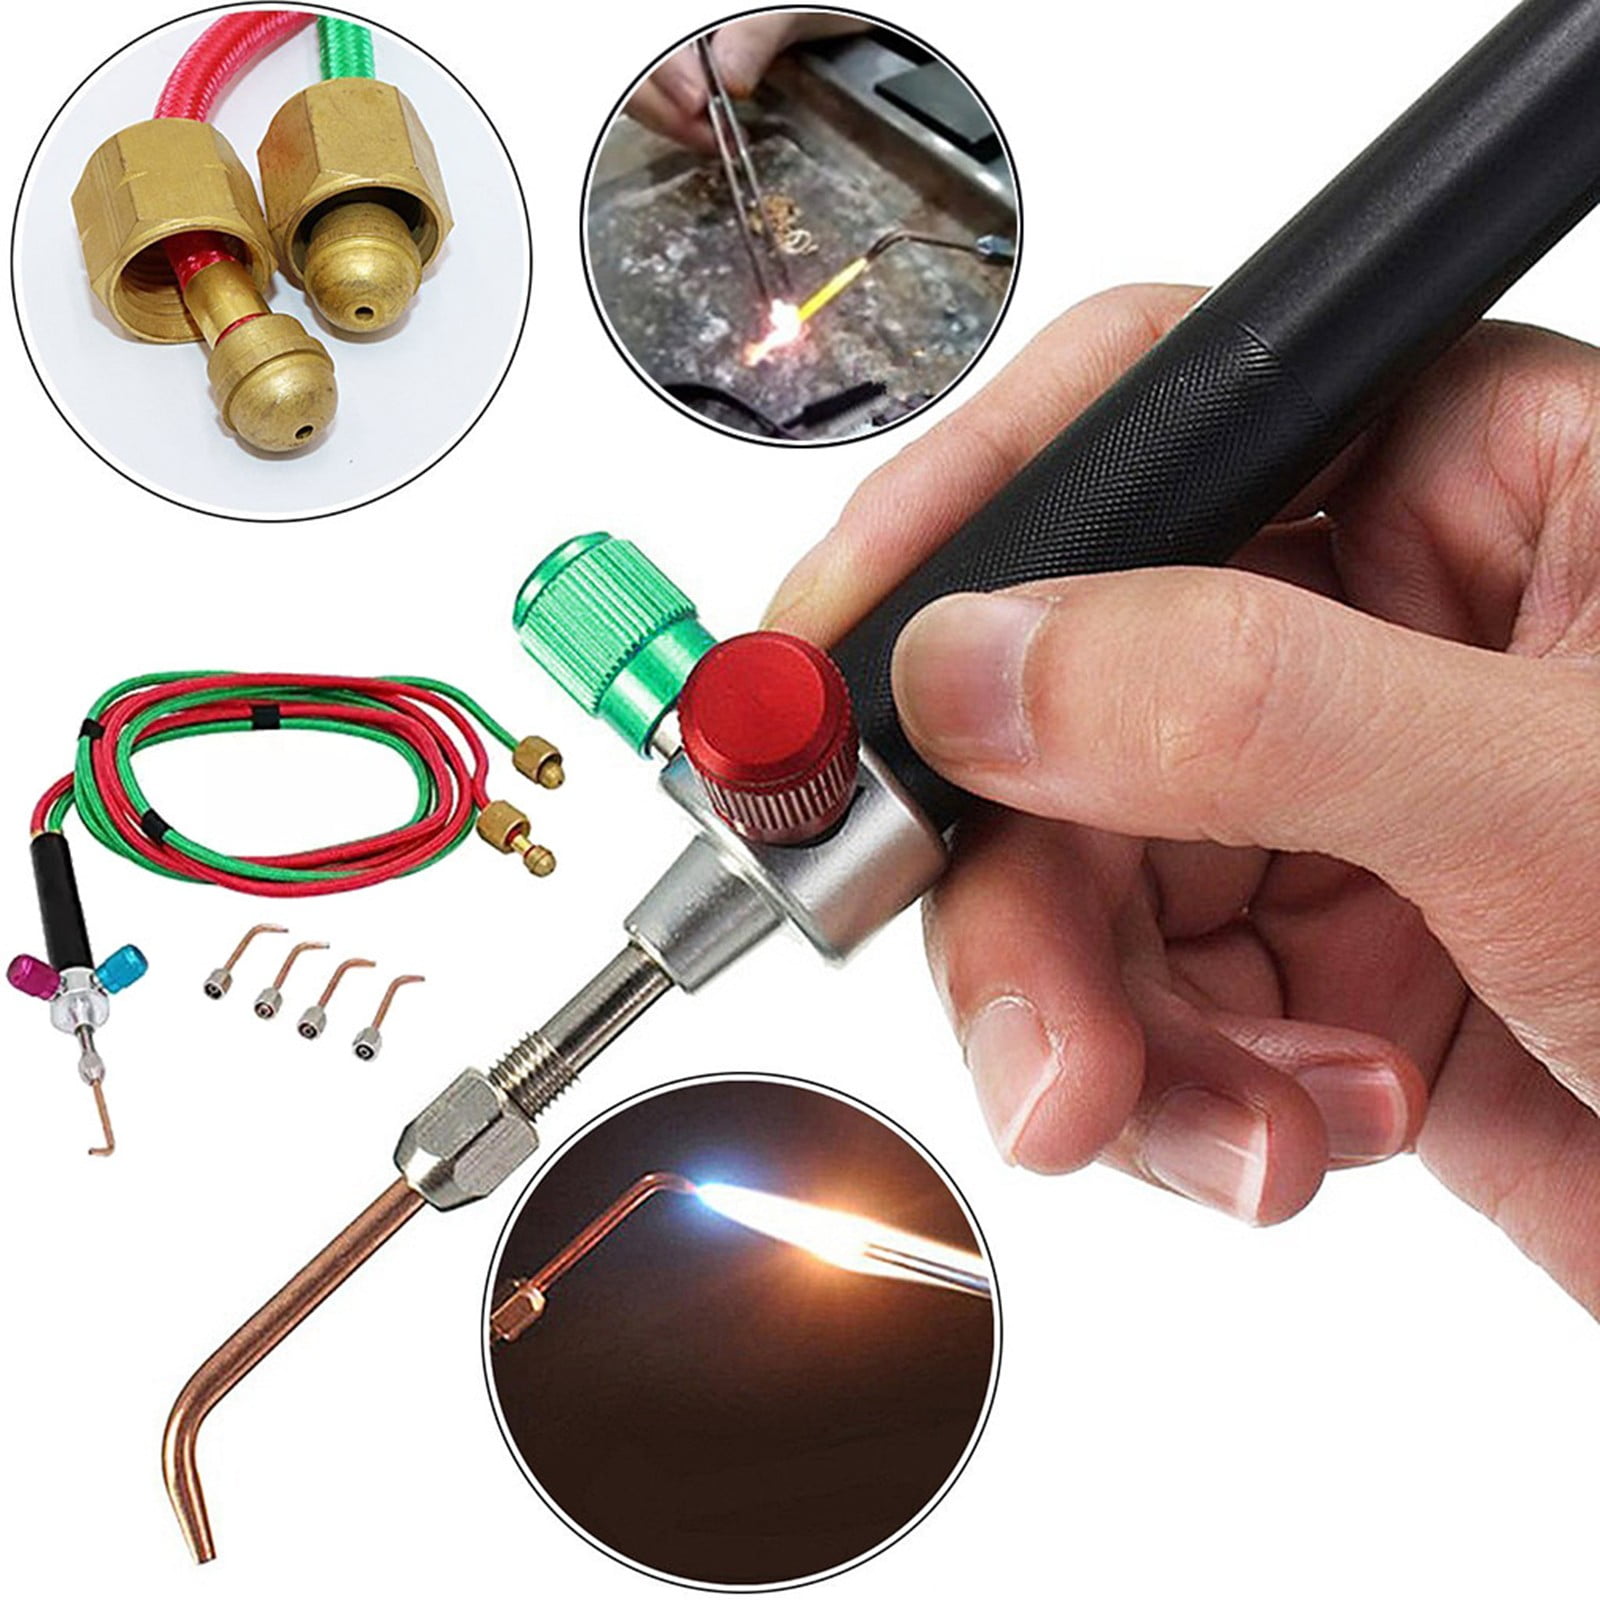 Hot Jewelers Micro Mini Gas Little Torch Welding Soldering Kit & 5 Tips 100% NEW 